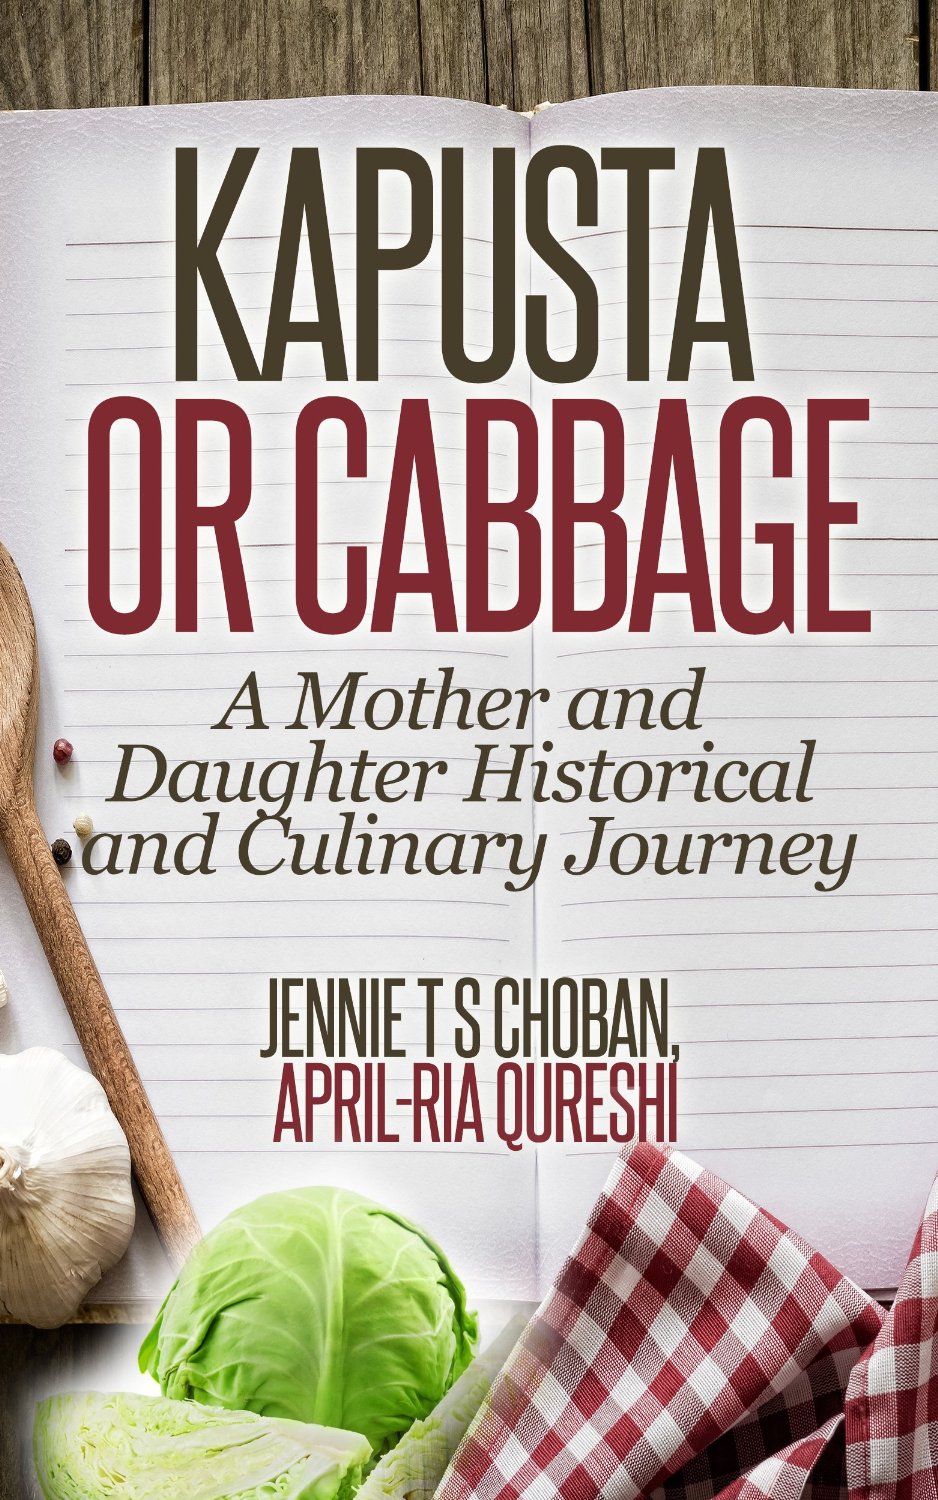 Kapusta or Cabbage: A Mother and Daughter Historical and Culinary Journey by Jennie TS Choban and April-Ria Qureshi